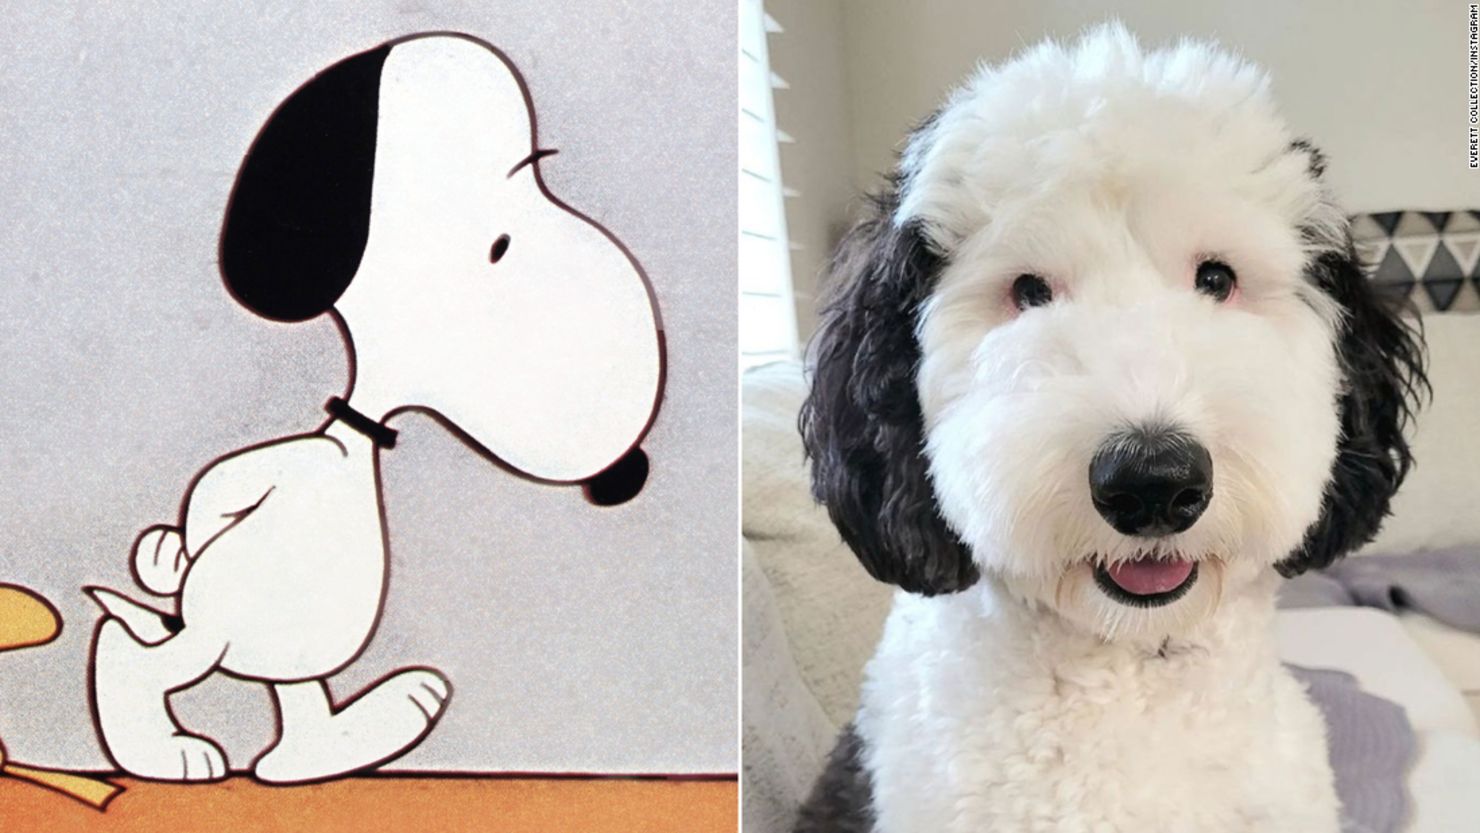 Snoopy, shown left, seems to have a look-alike in Bayley, shown on the right.